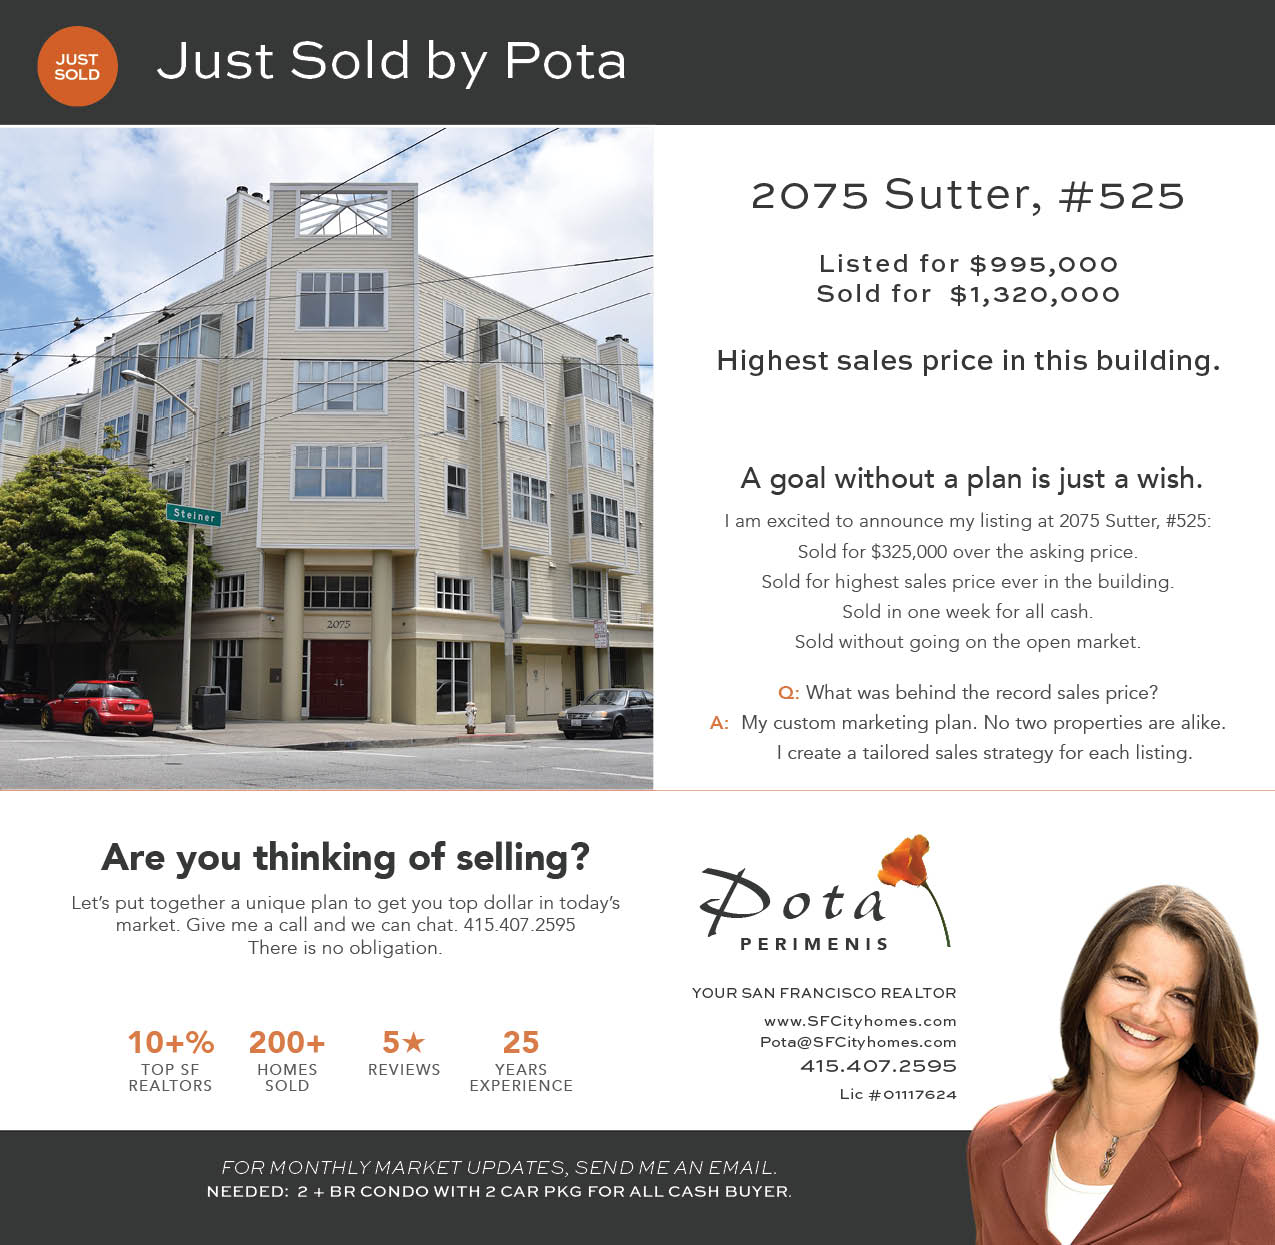 Just Sold: 2075 Sutter St, #525